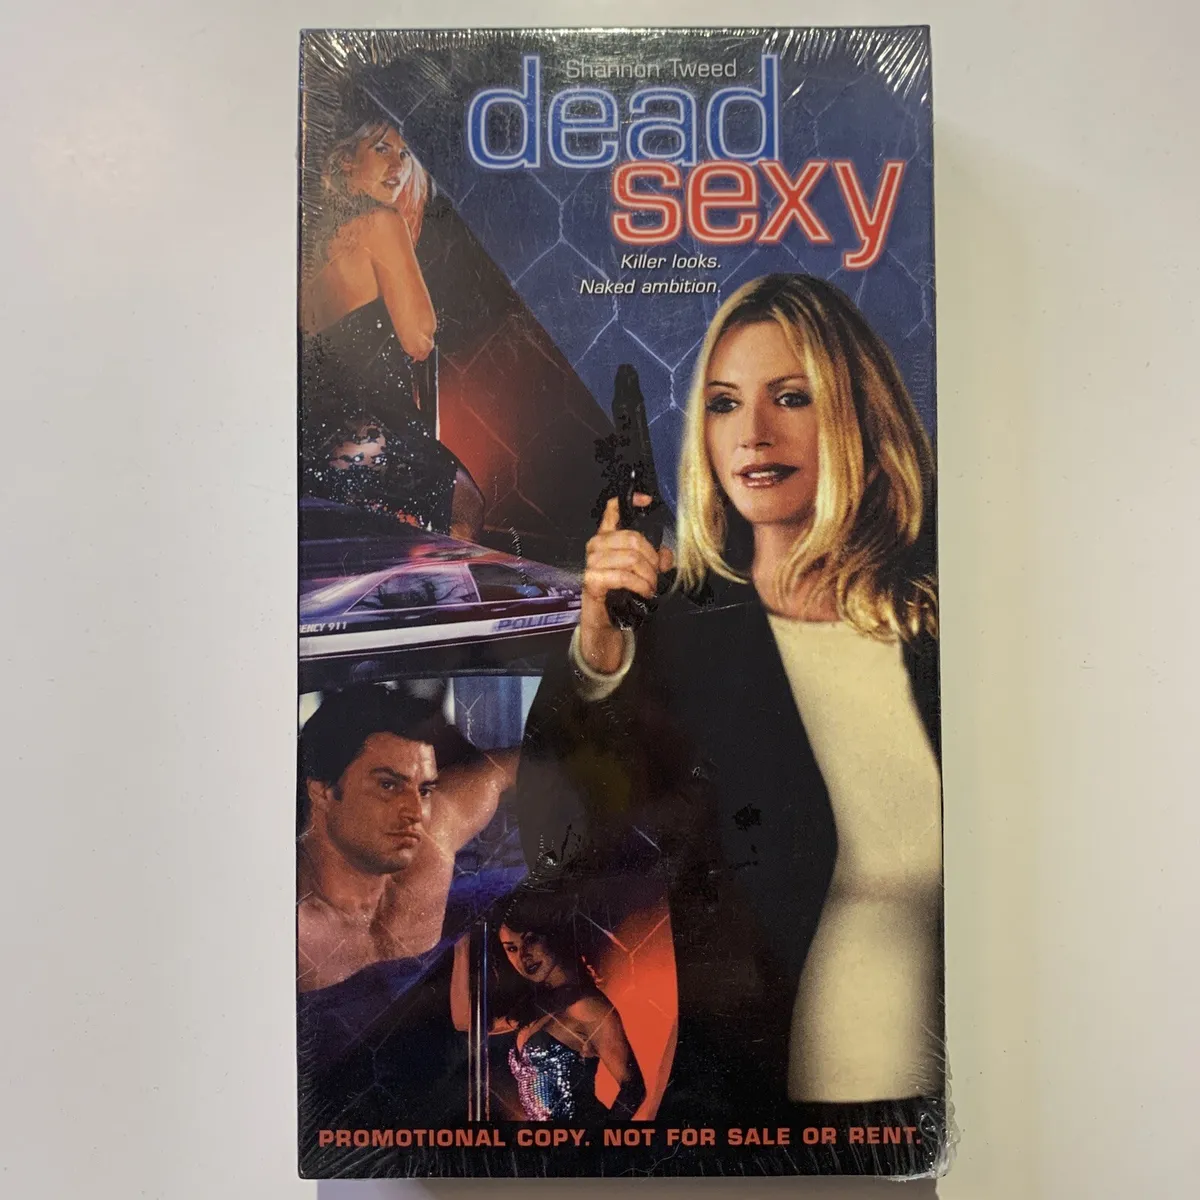 danielle goud recommends Shannon Tweed Dead Sexy